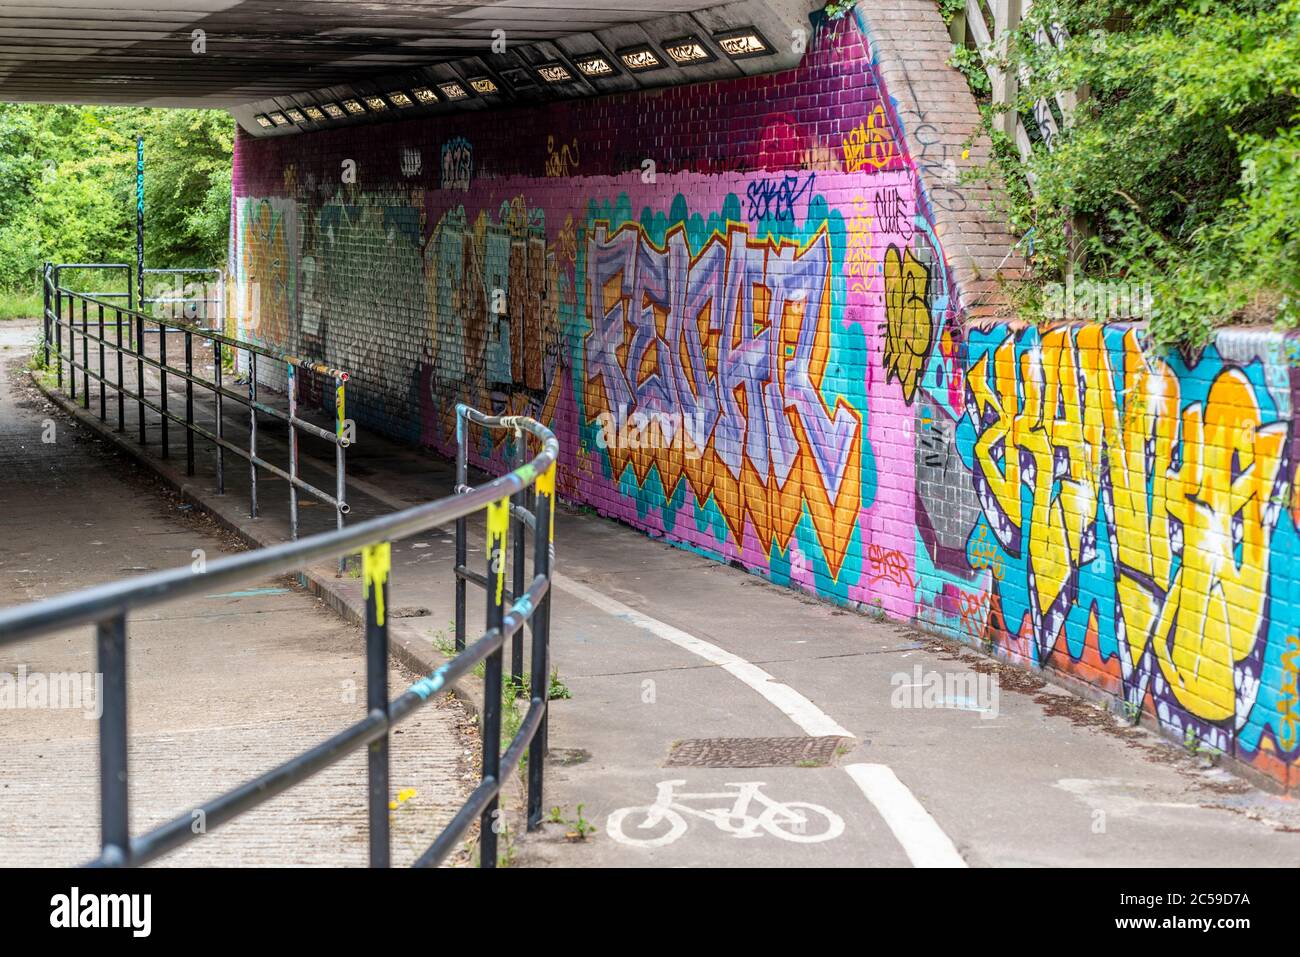 Public bridleway, cycle path and footpath in Southend on Sea, Essex, UK, to Green Lane and Jubilee Country Park. Mixed use grim underpass subway Stock Photo